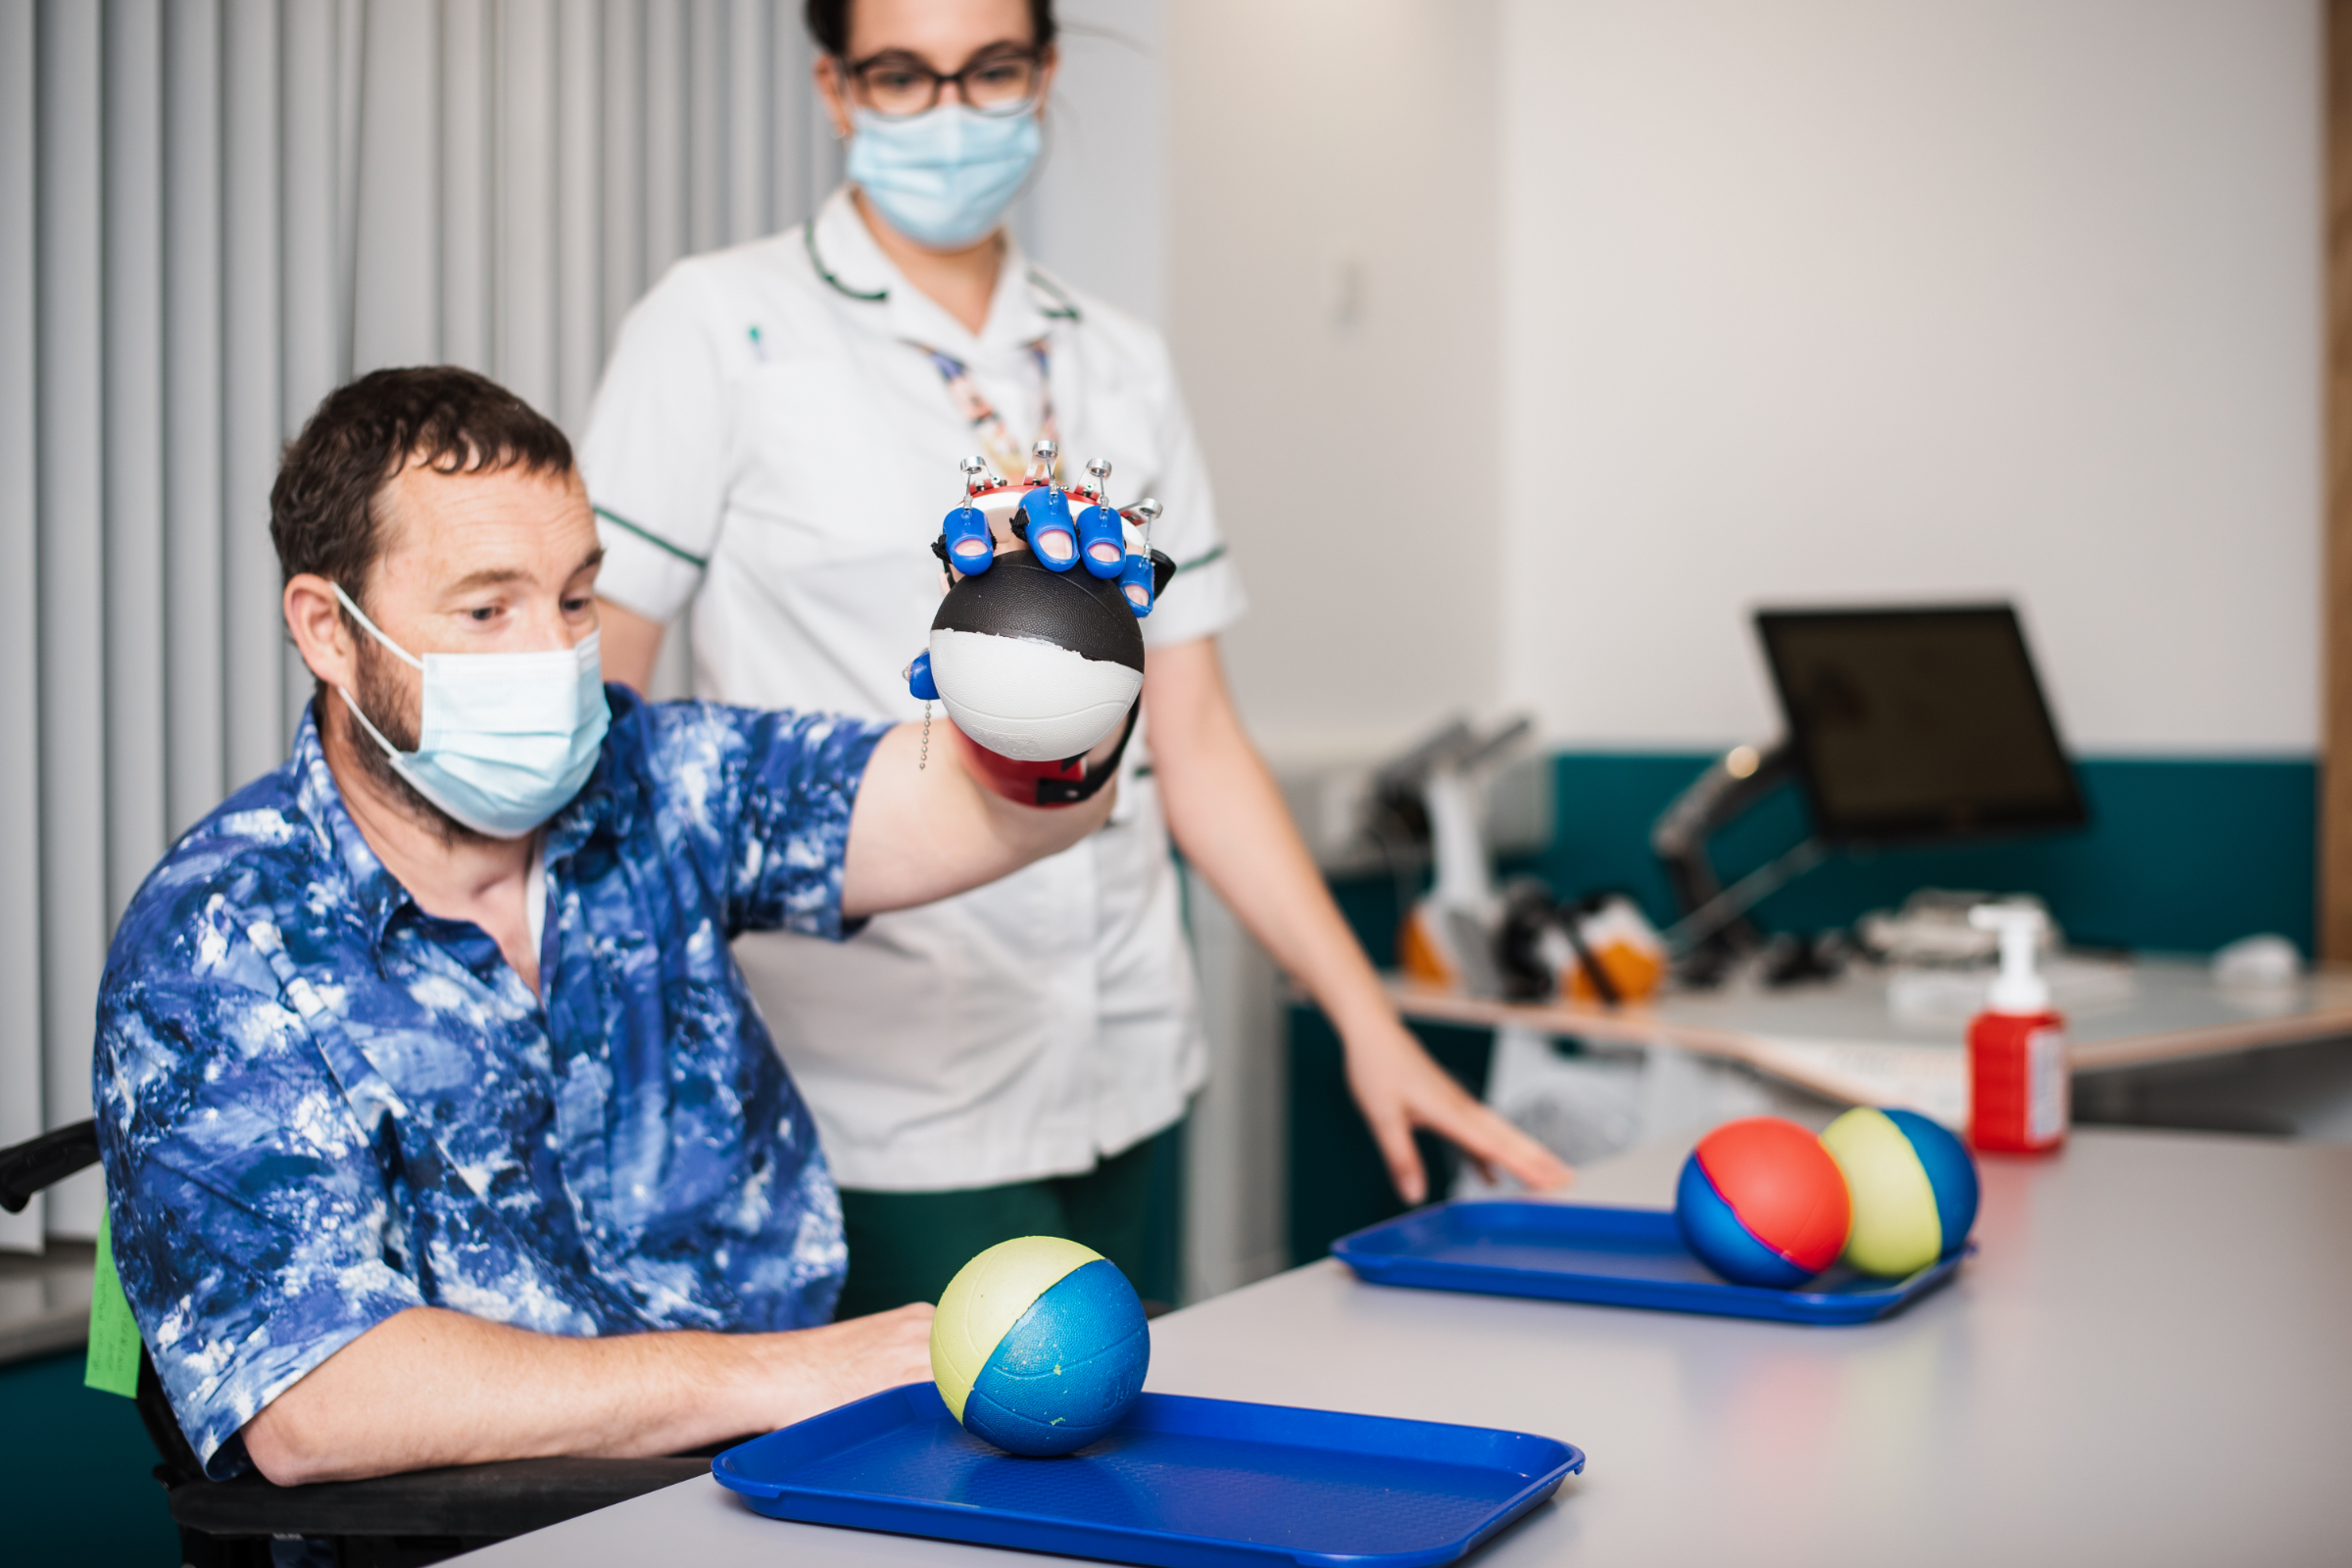 A spinal injury patient, a white man in his 40s, is holding a ball using a robotic arm. He's wearing a blu pattenred shirt and is using a wheelchair. A healthcare assistant is supporting him.